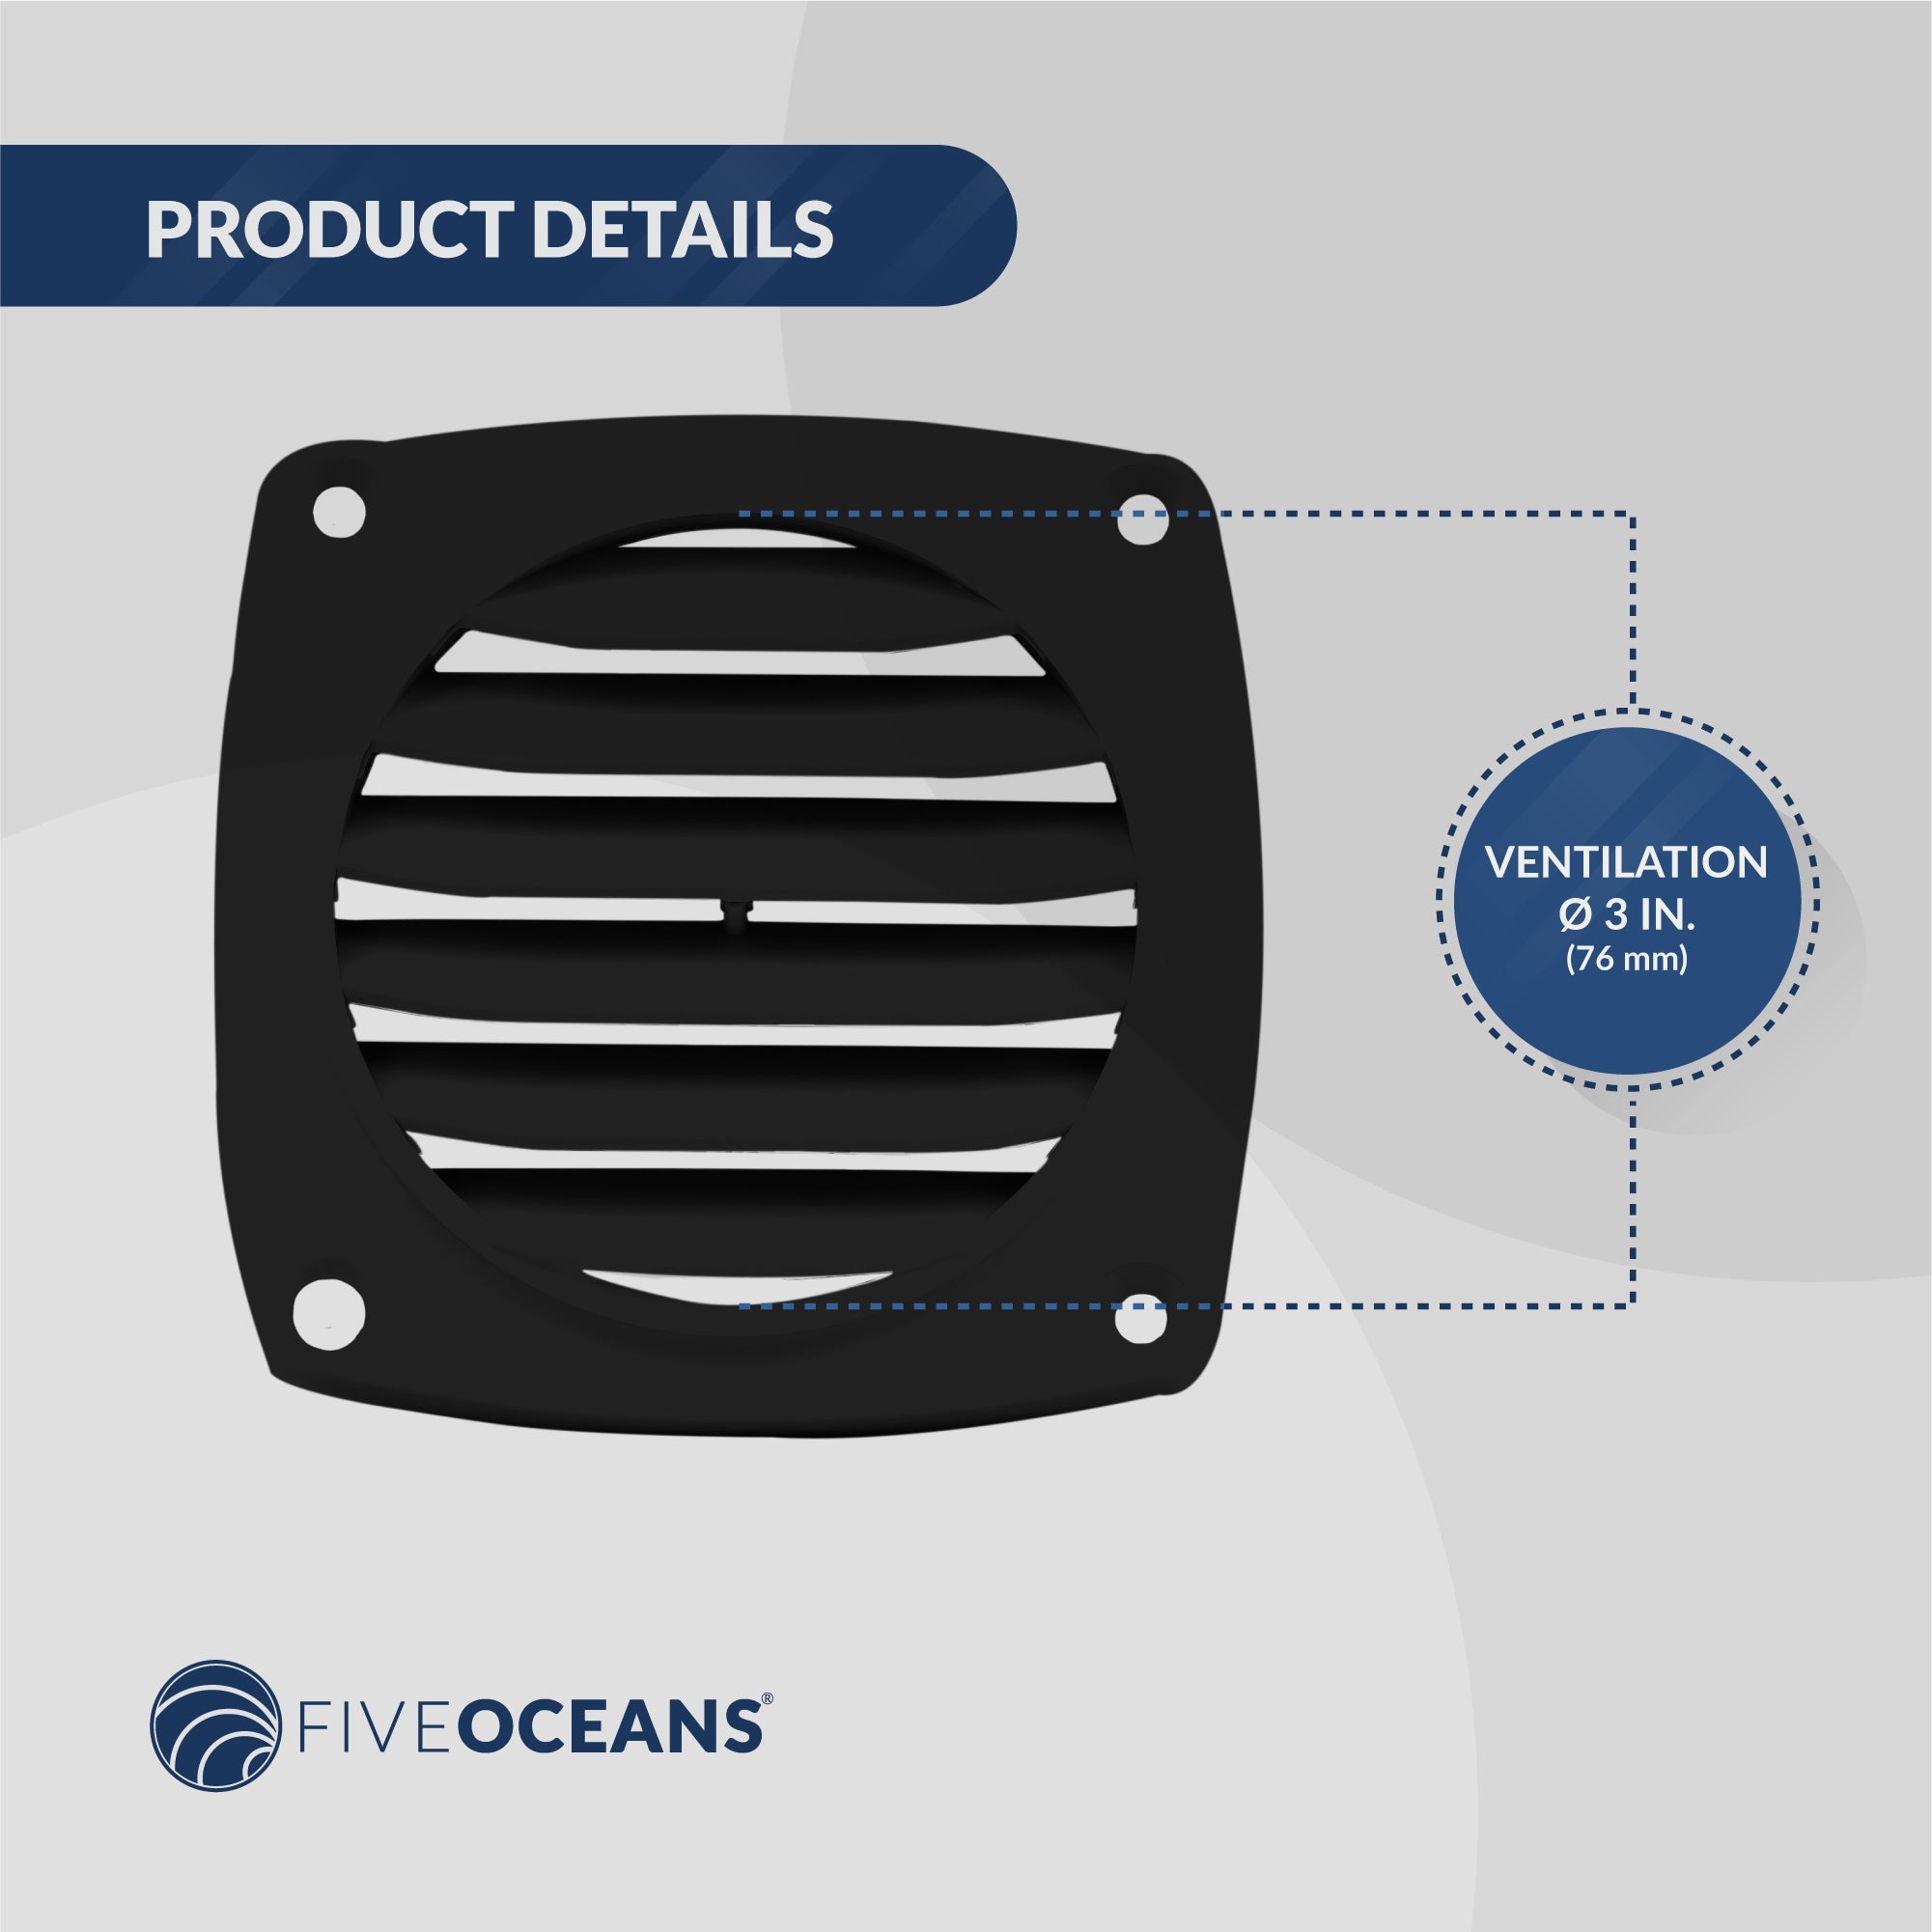 Louvered Flush Hose Ventilators, Ventilation Area of 3 inches diameter, Black, Injection-Molded ABS Plastic, 6 slots, Easy Installation-Canadian Marine &amp; Outdoor Equipment